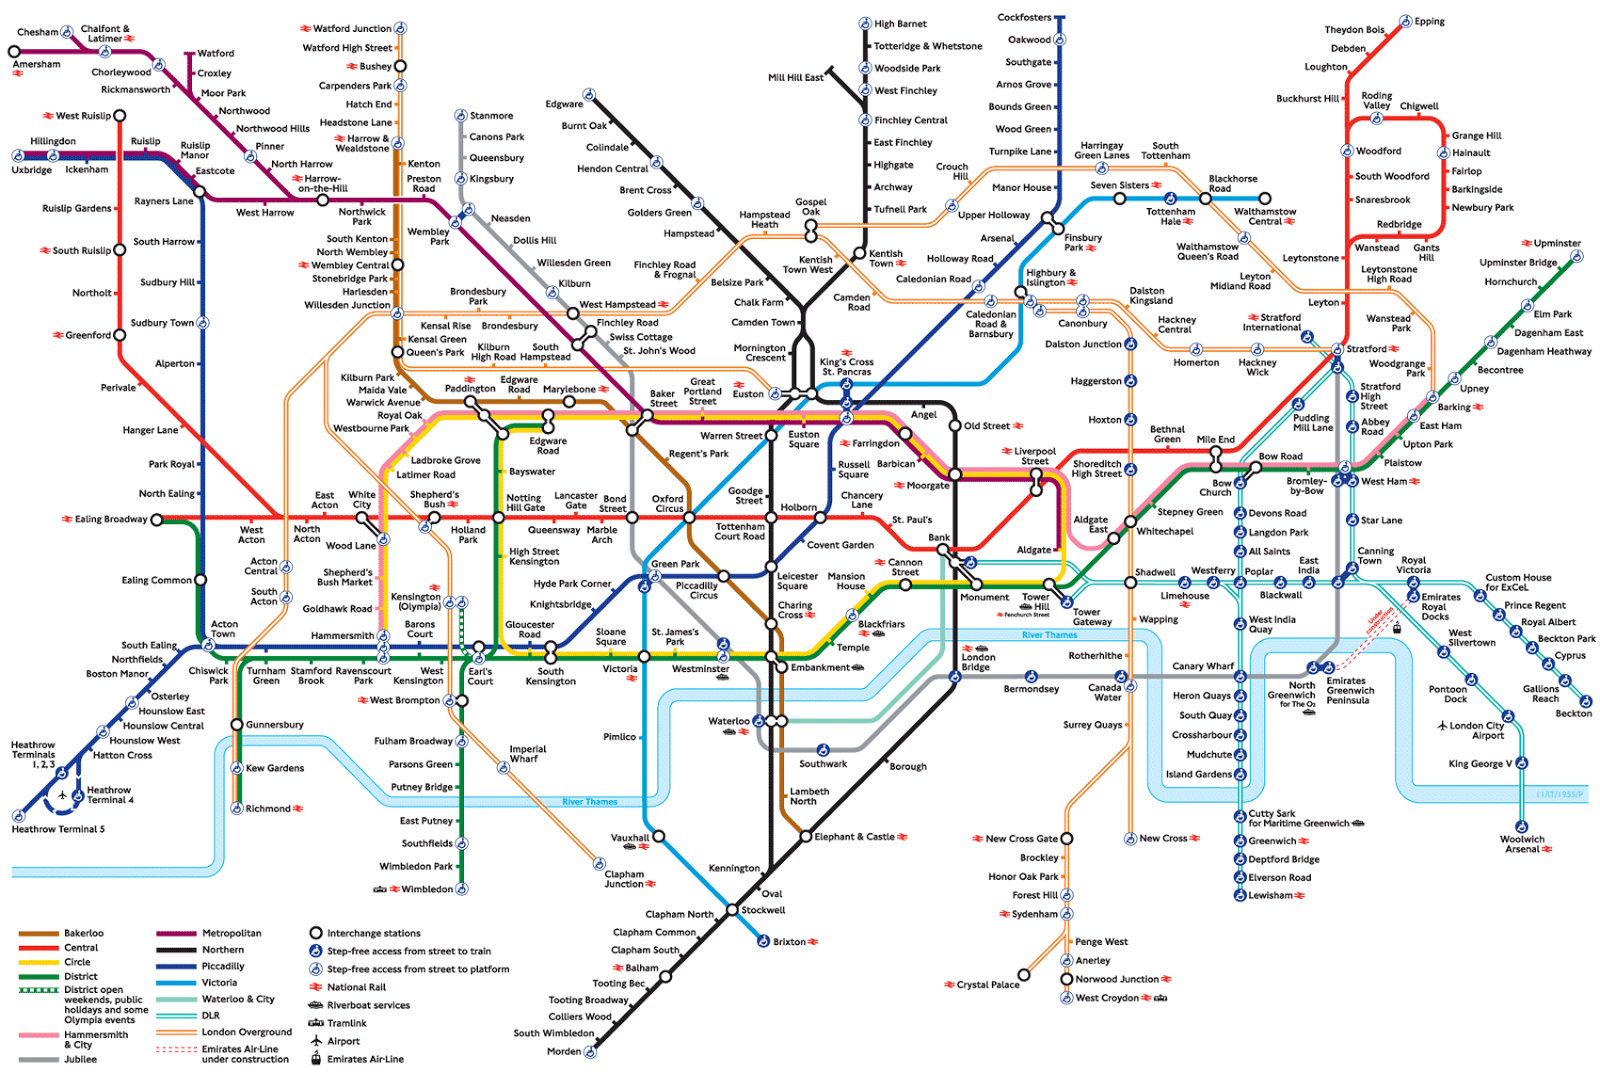 London Courant: Mapping the Underground